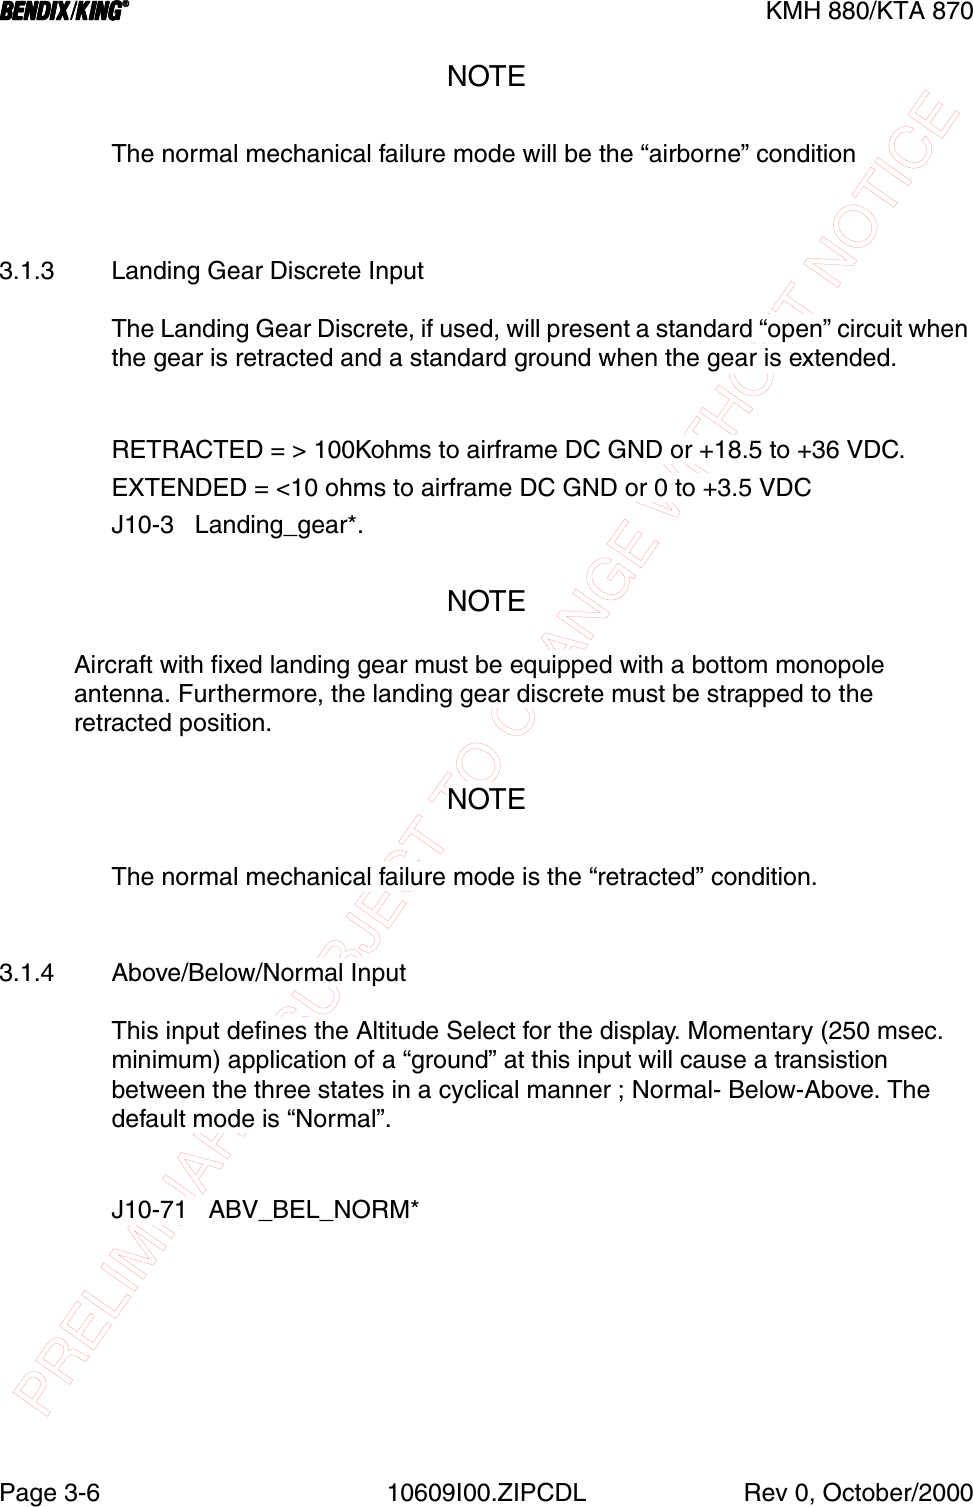 PRELIMINARY - SUBJECT TO CHANGE WITHOUT NOTICEBBBBKMH 880/KTA 870Page 3-6 10609I00.ZIPCDL Rev 0, October/2000NOTEThe normal mechanical failure mode will be the “airborne” condition3.1.3 Landing Gear Discrete InputThe Landing Gear Discrete, if used, will present a standard “open” circuit when the gear is retracted and a standard ground when the gear is extended.RETRACTED = &gt; 100Kohms to airframe DC GND or +18.5 to +36 VDC.EXTENDED = &lt;10 ohms to airframe DC GND or 0 to +3.5 VDCJ10-3   Landing_gear*.NOTEAircraft with fixed landing gear must be equipped with a bottom monopole antenna. Furthermore, the landing gear discrete must be strapped to the retracted position.NOTEThe normal mechanical failure mode is the “retracted” condition.3.1.4 Above/Below/Normal InputThis input defines the Altitude Select for the display. Momentary (250 msec. minimum) application of a “ground” at this input will cause a transistion between the three states in a cyclical manner ; Normal- Below-Above. The default mode is “Normal”.J10-71   ABV_BEL_NORM*